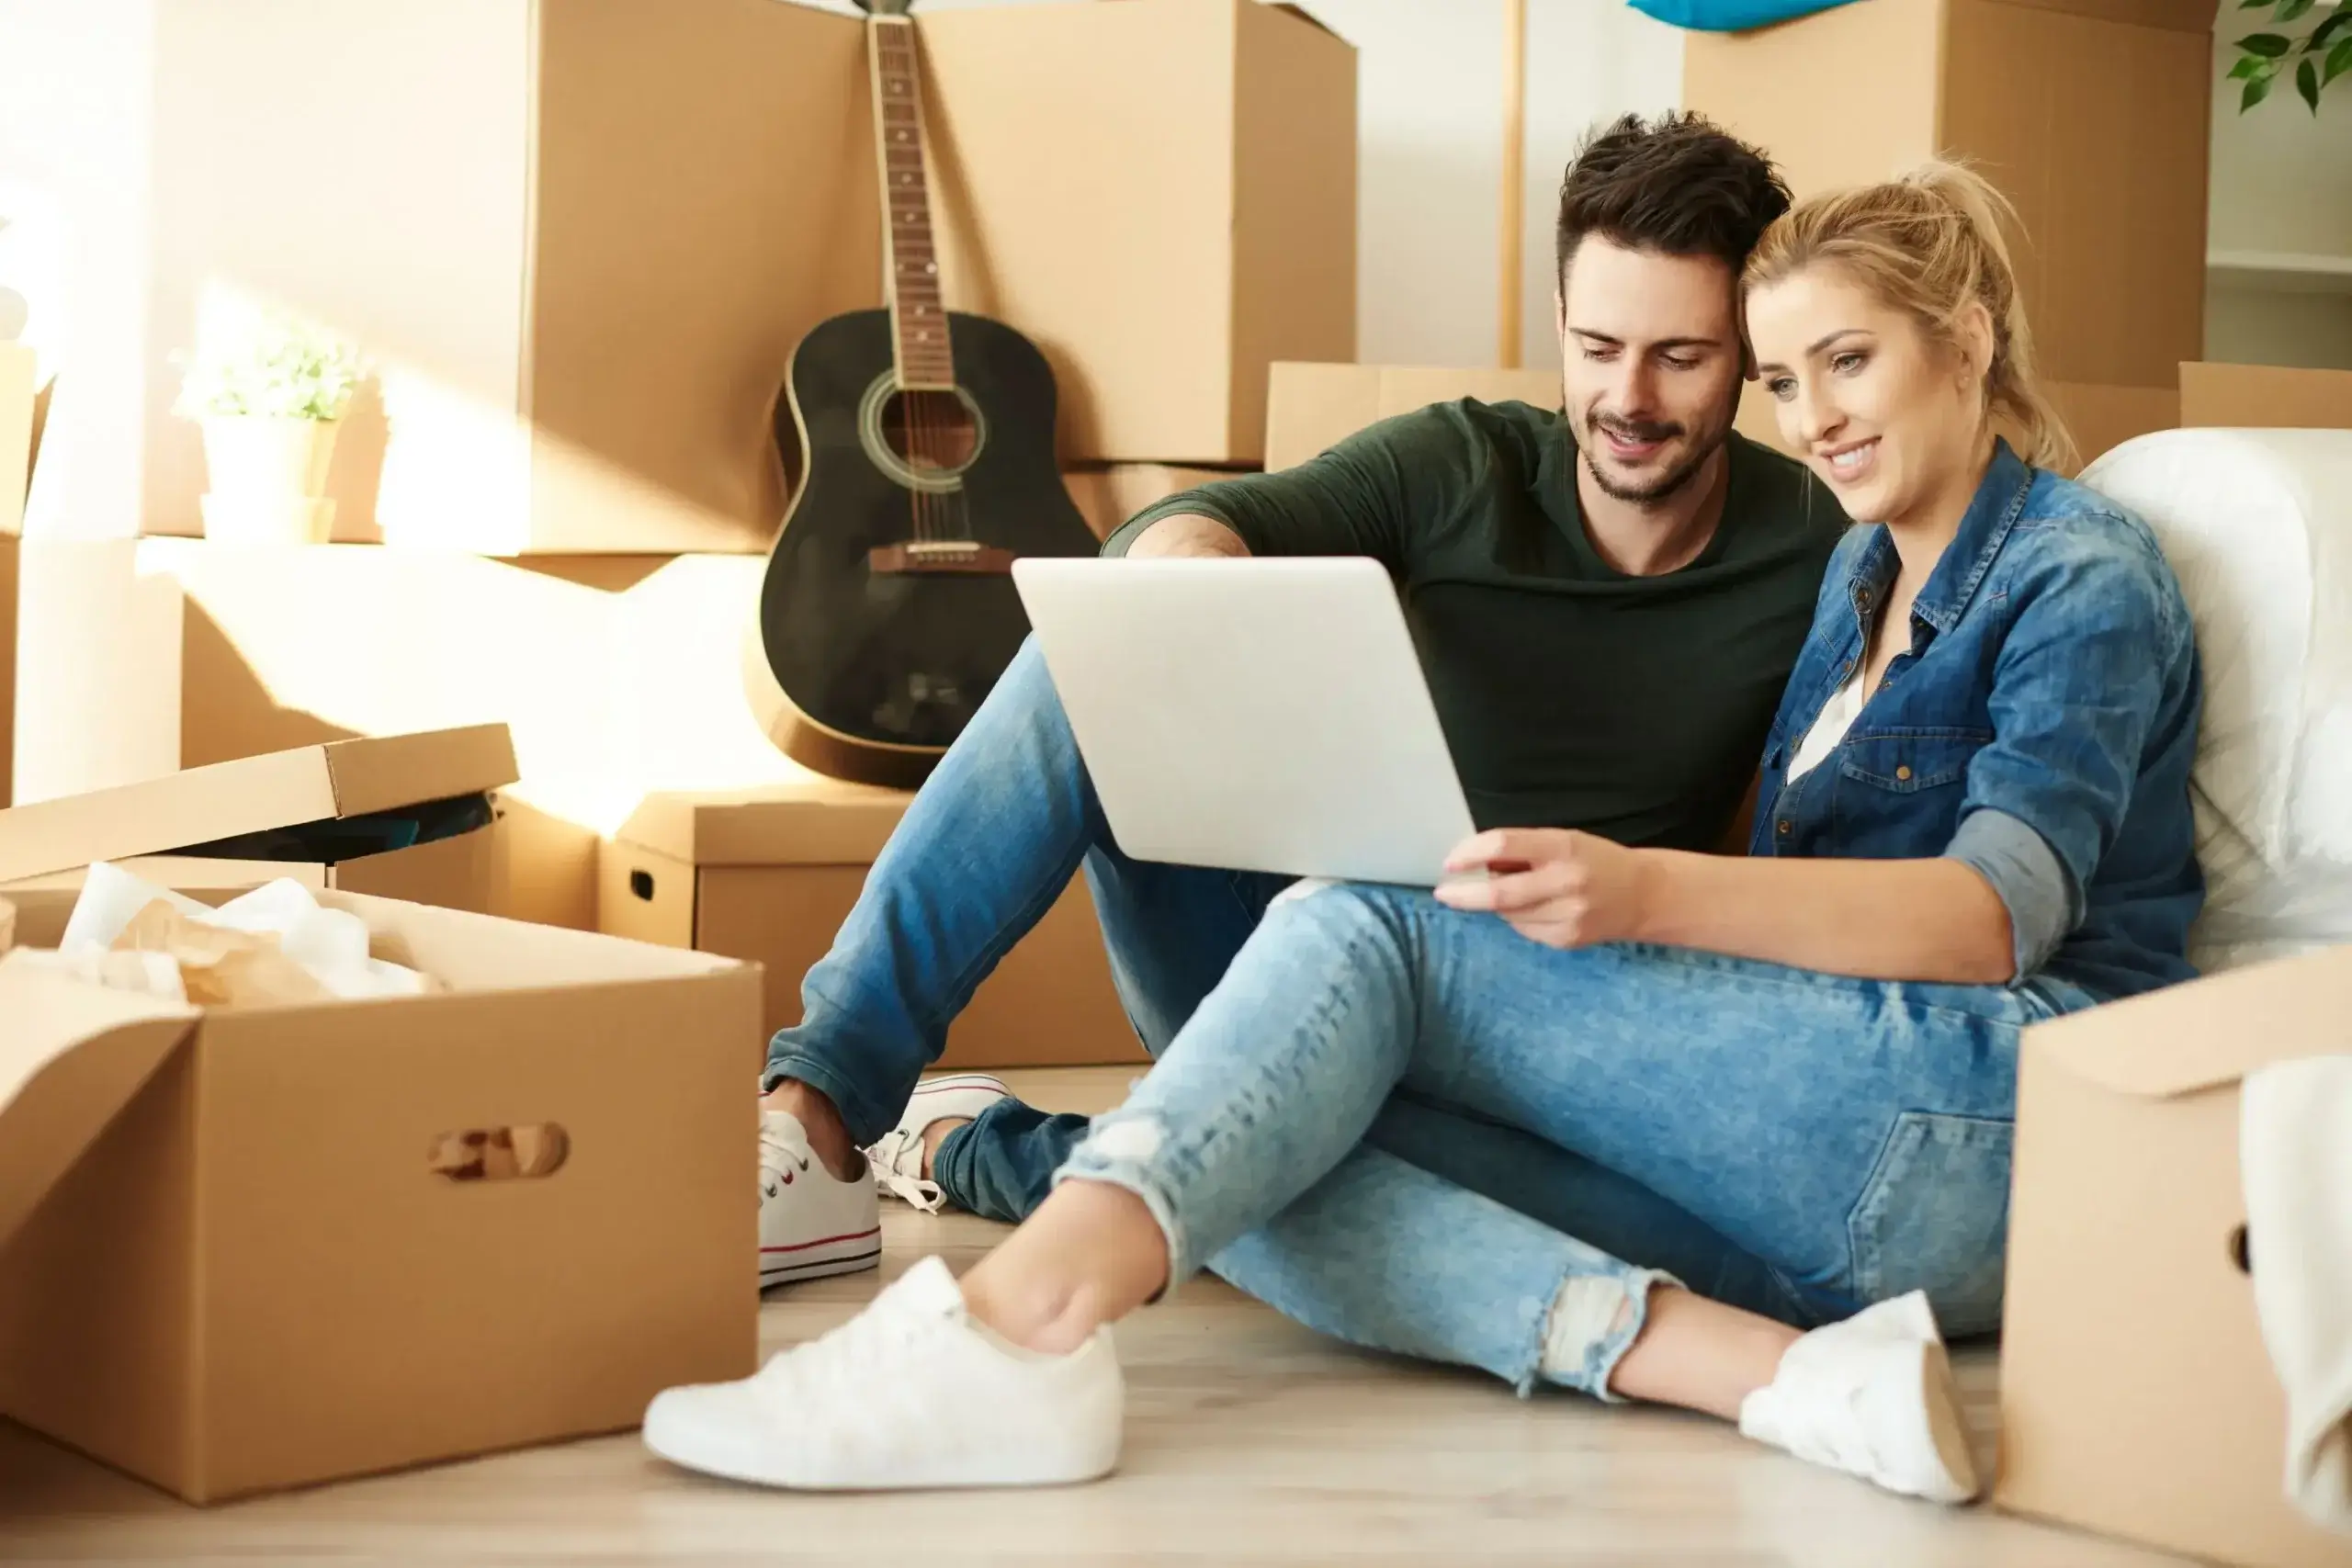 In this step-by-step guide, we'll discuss how to choose the best moving company in Jersey City.